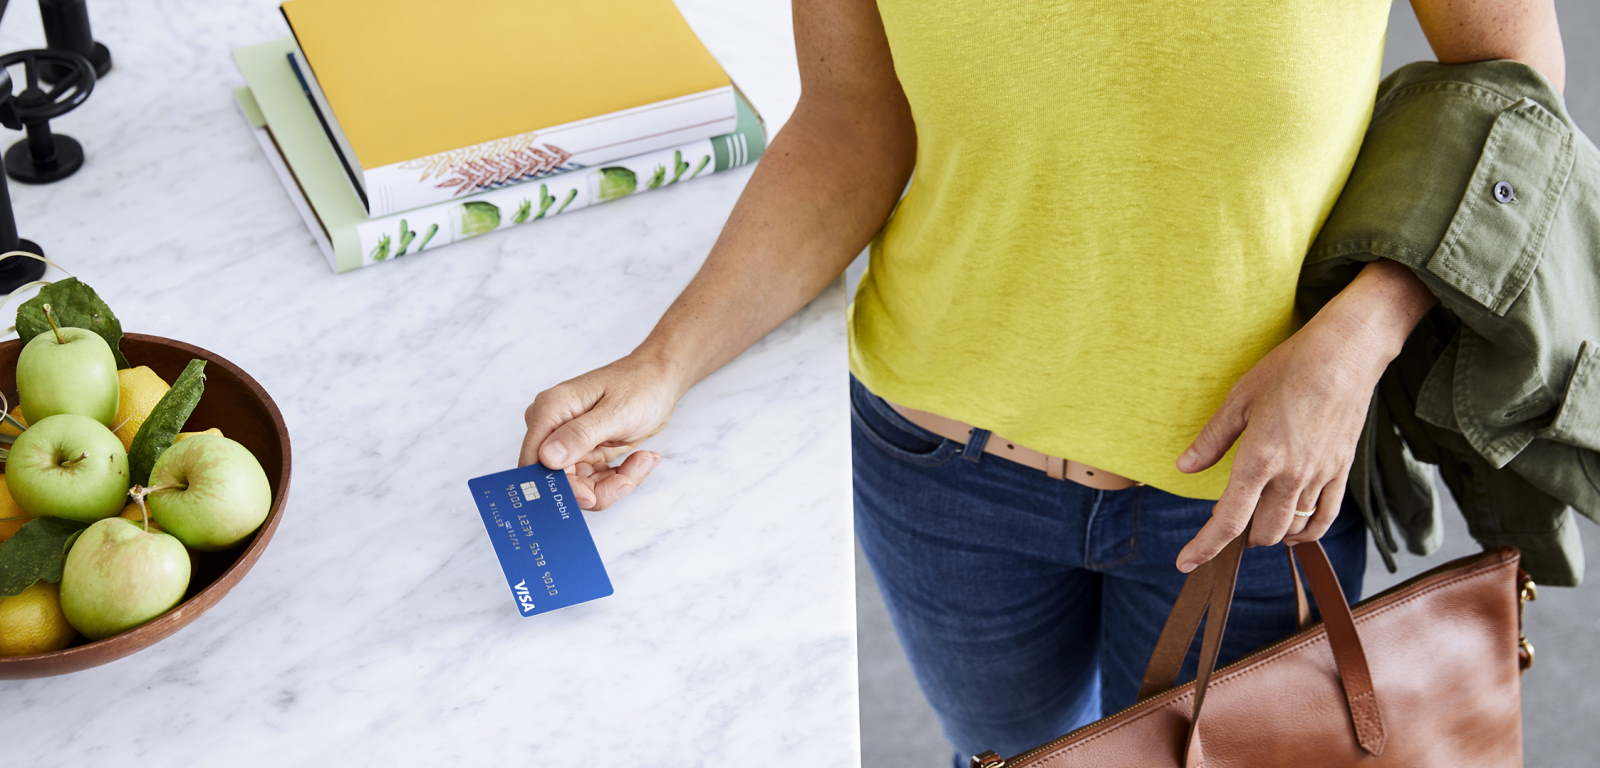 Woman paying with card